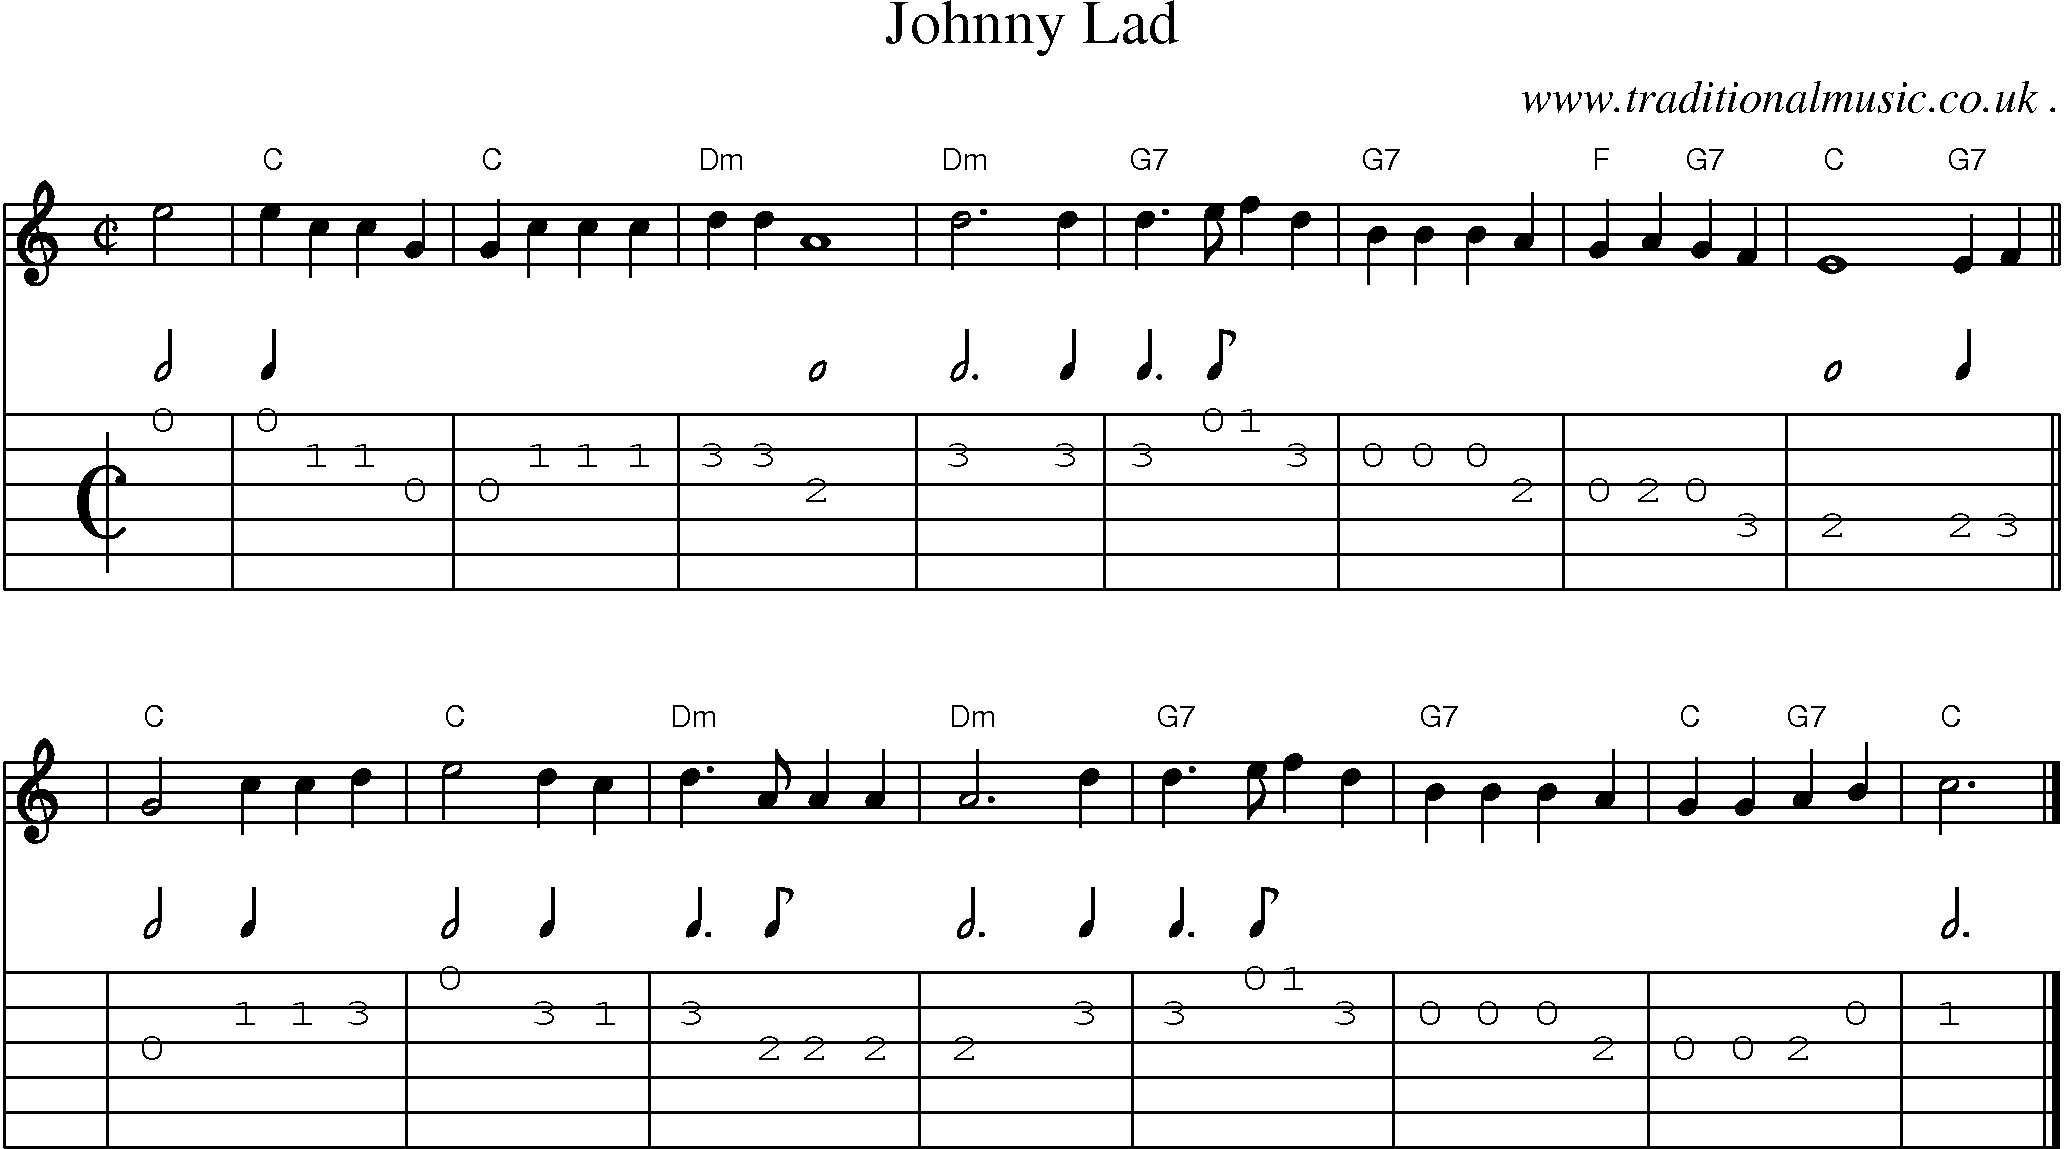 Sheet-music  score, Chords and Guitar Tabs for Johnny Lad